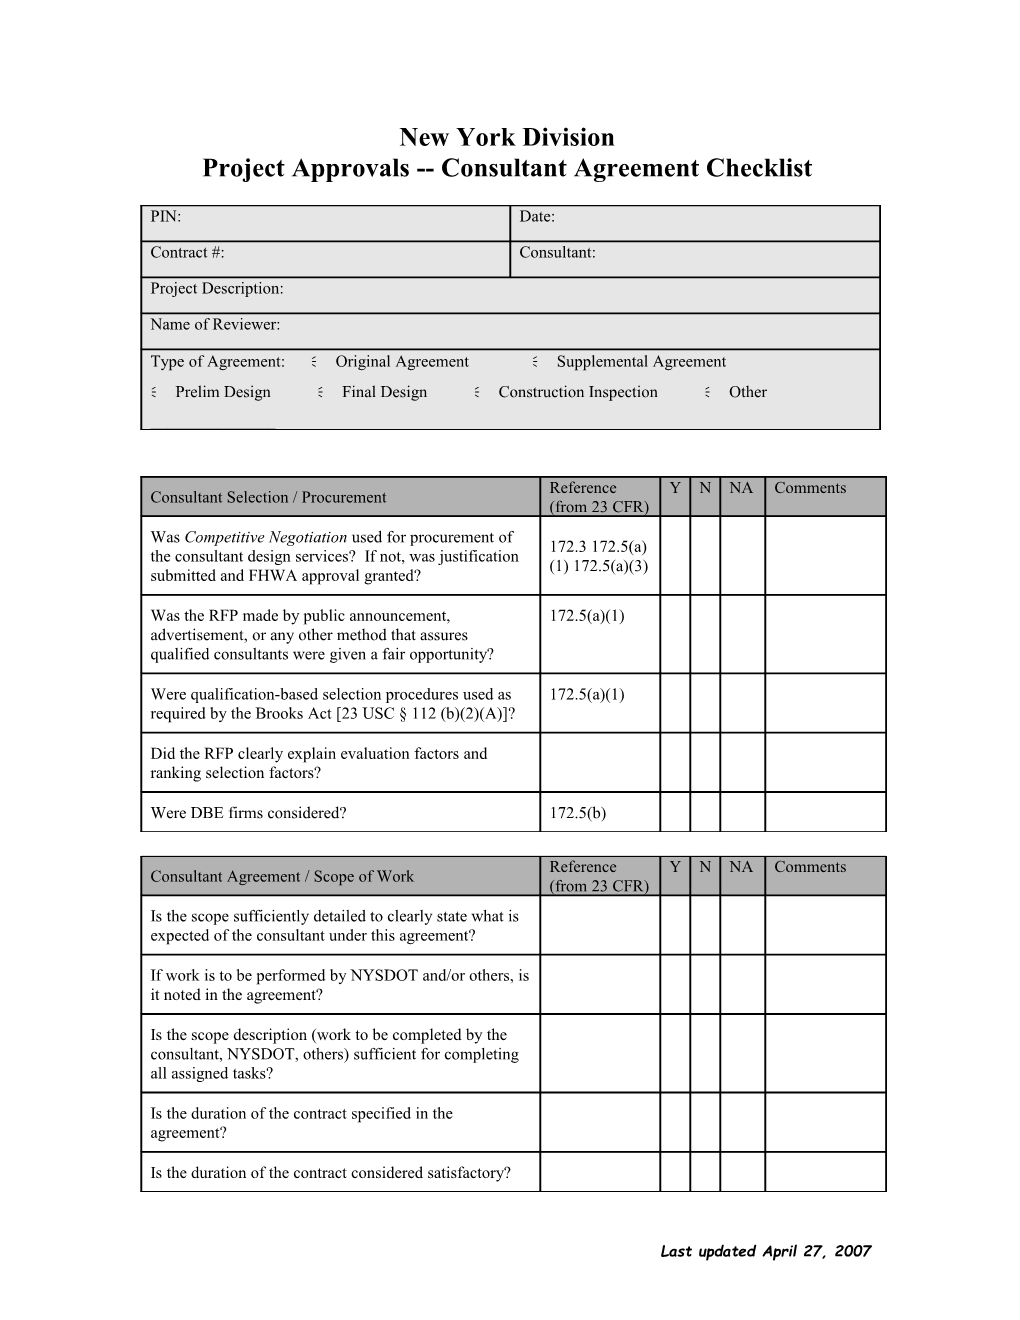 Project Approvals Consultant Agreement Checklist